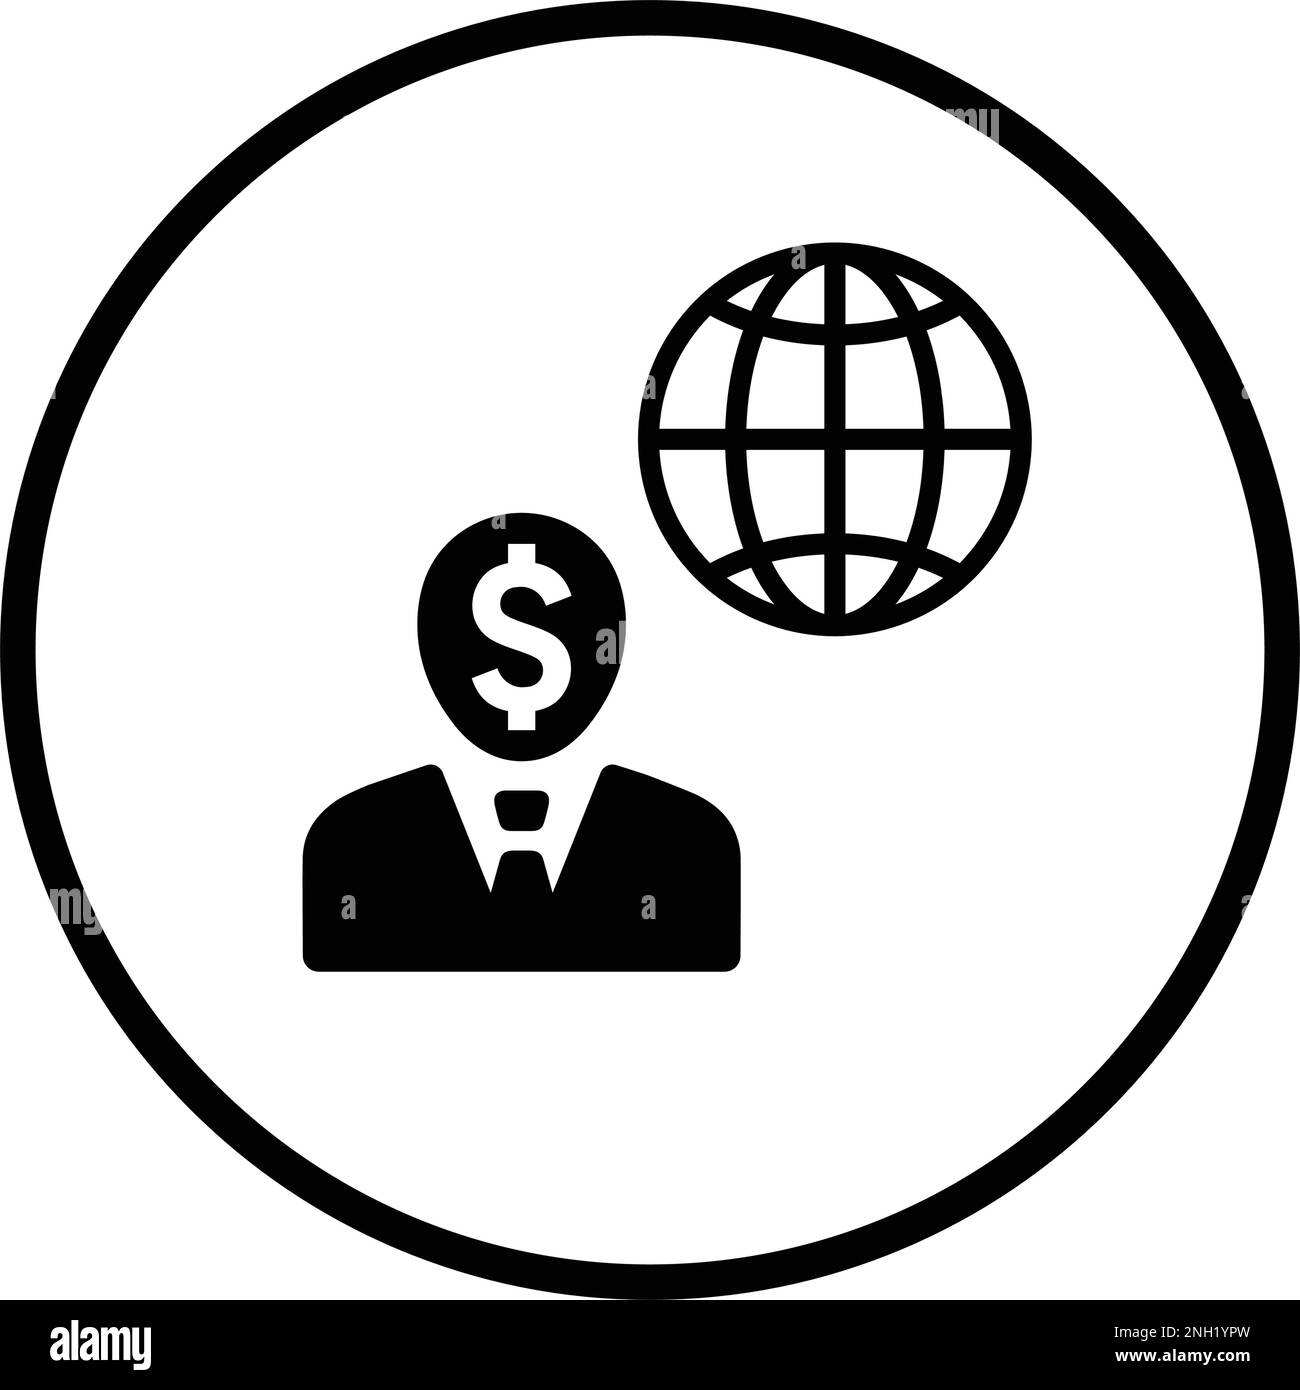 Global Business Dear icon use in mobile and app development or commercial purposes or any type of design projects. Stock Vector